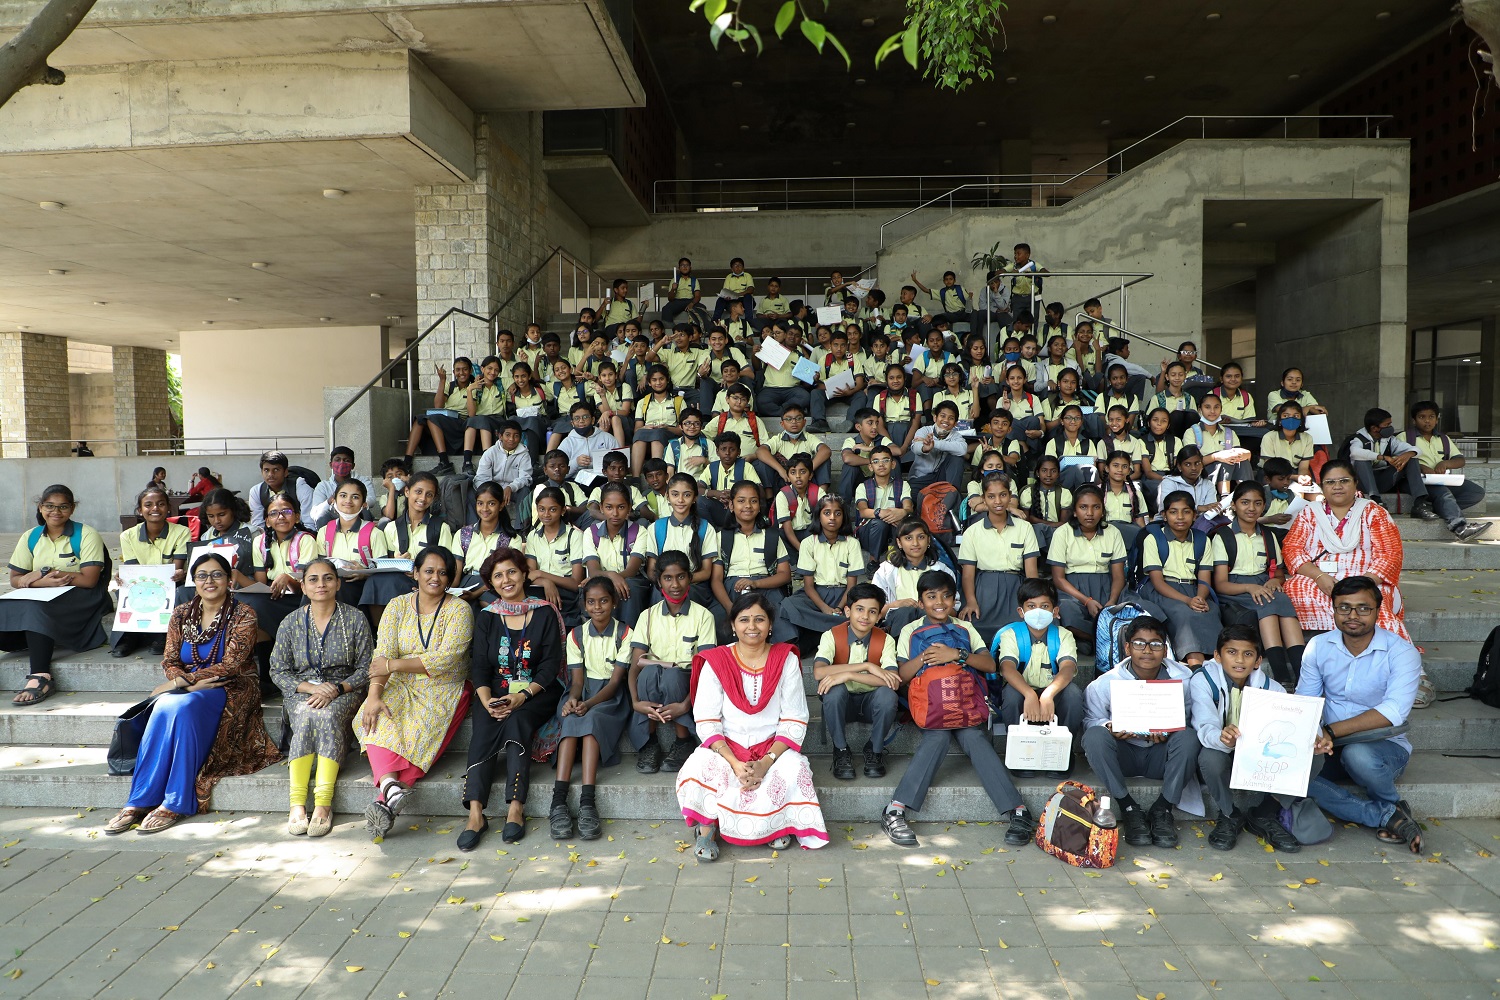 Prof. Haritha Saranga, Chairperson of the Sustainability Task Force at IIMB, with students of Grade 6 of Samhita Academy who visited the IIMB campus on 21st February 2023. They participated in a Sustainability competition as part of an intervention that Prof. Haritha Saranga has put together for the school, as part of NITI Aayog’s ‘Life Ideas’ project.